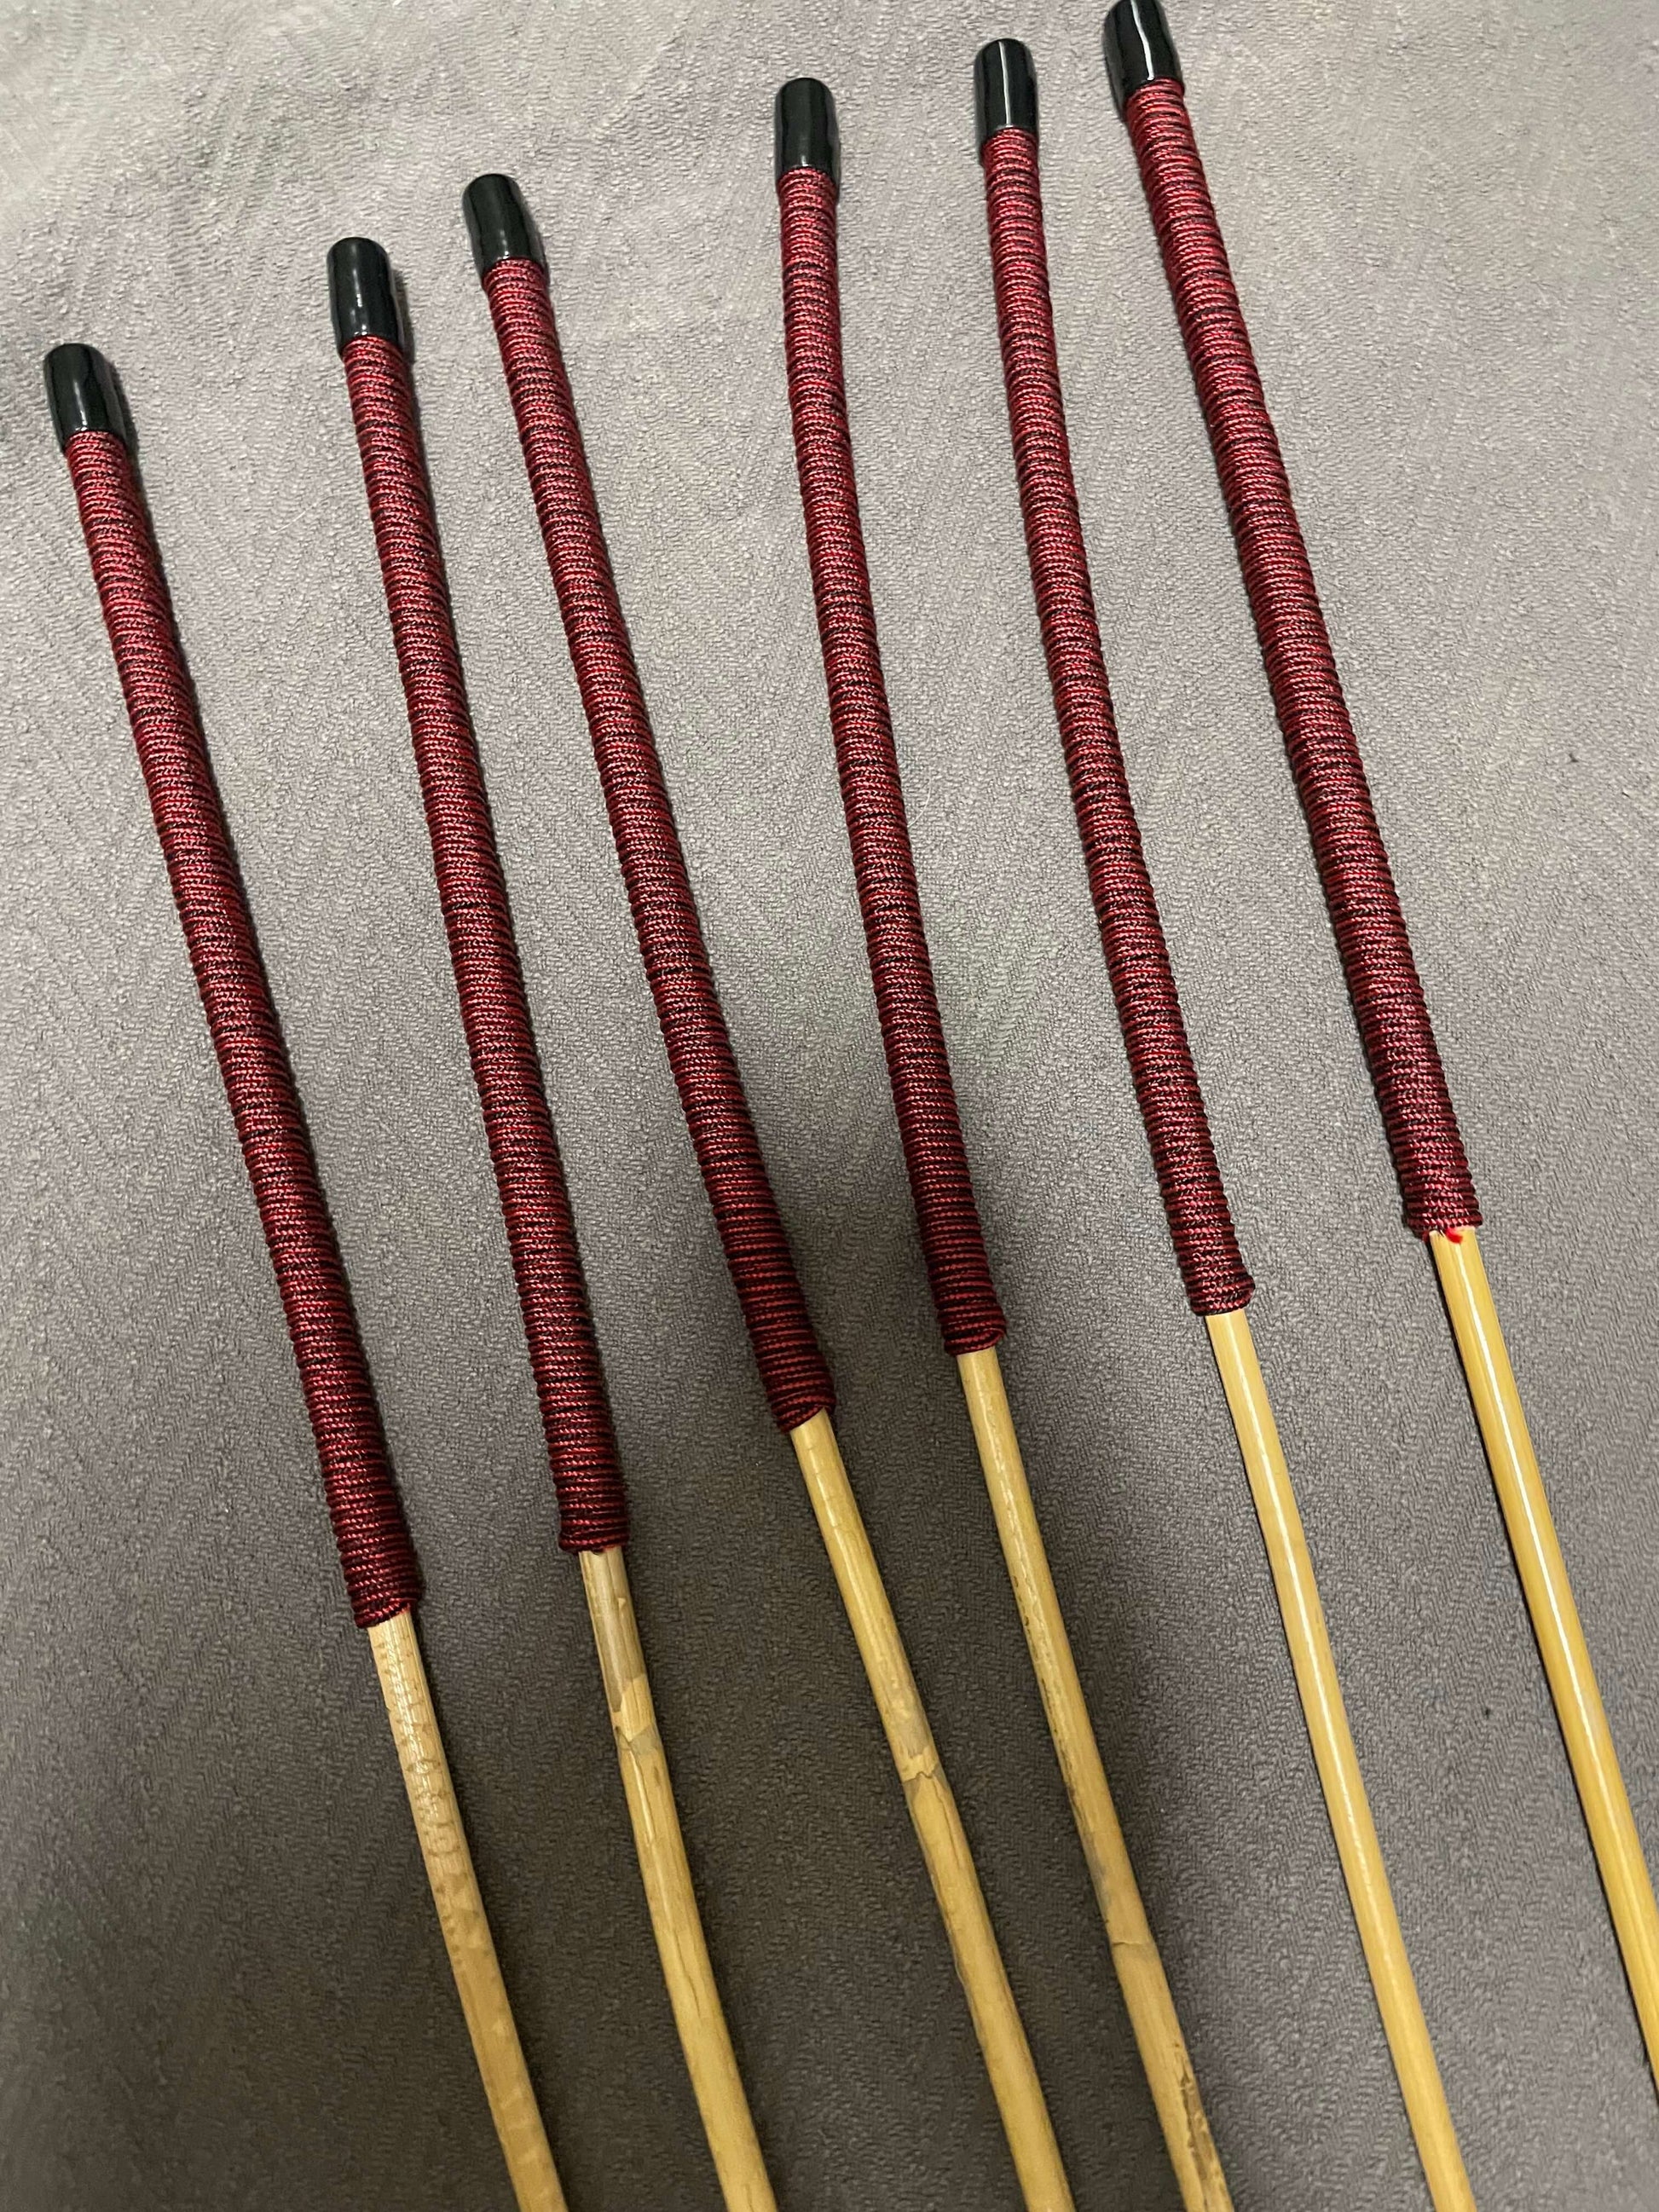 Set of 6 Classic Kooboo Rattan Punishment canes  with Liquorice Paracord Handles - 82 to 85 cms Length - 8 to 9.5 mm Diameters - Englishvice Canes